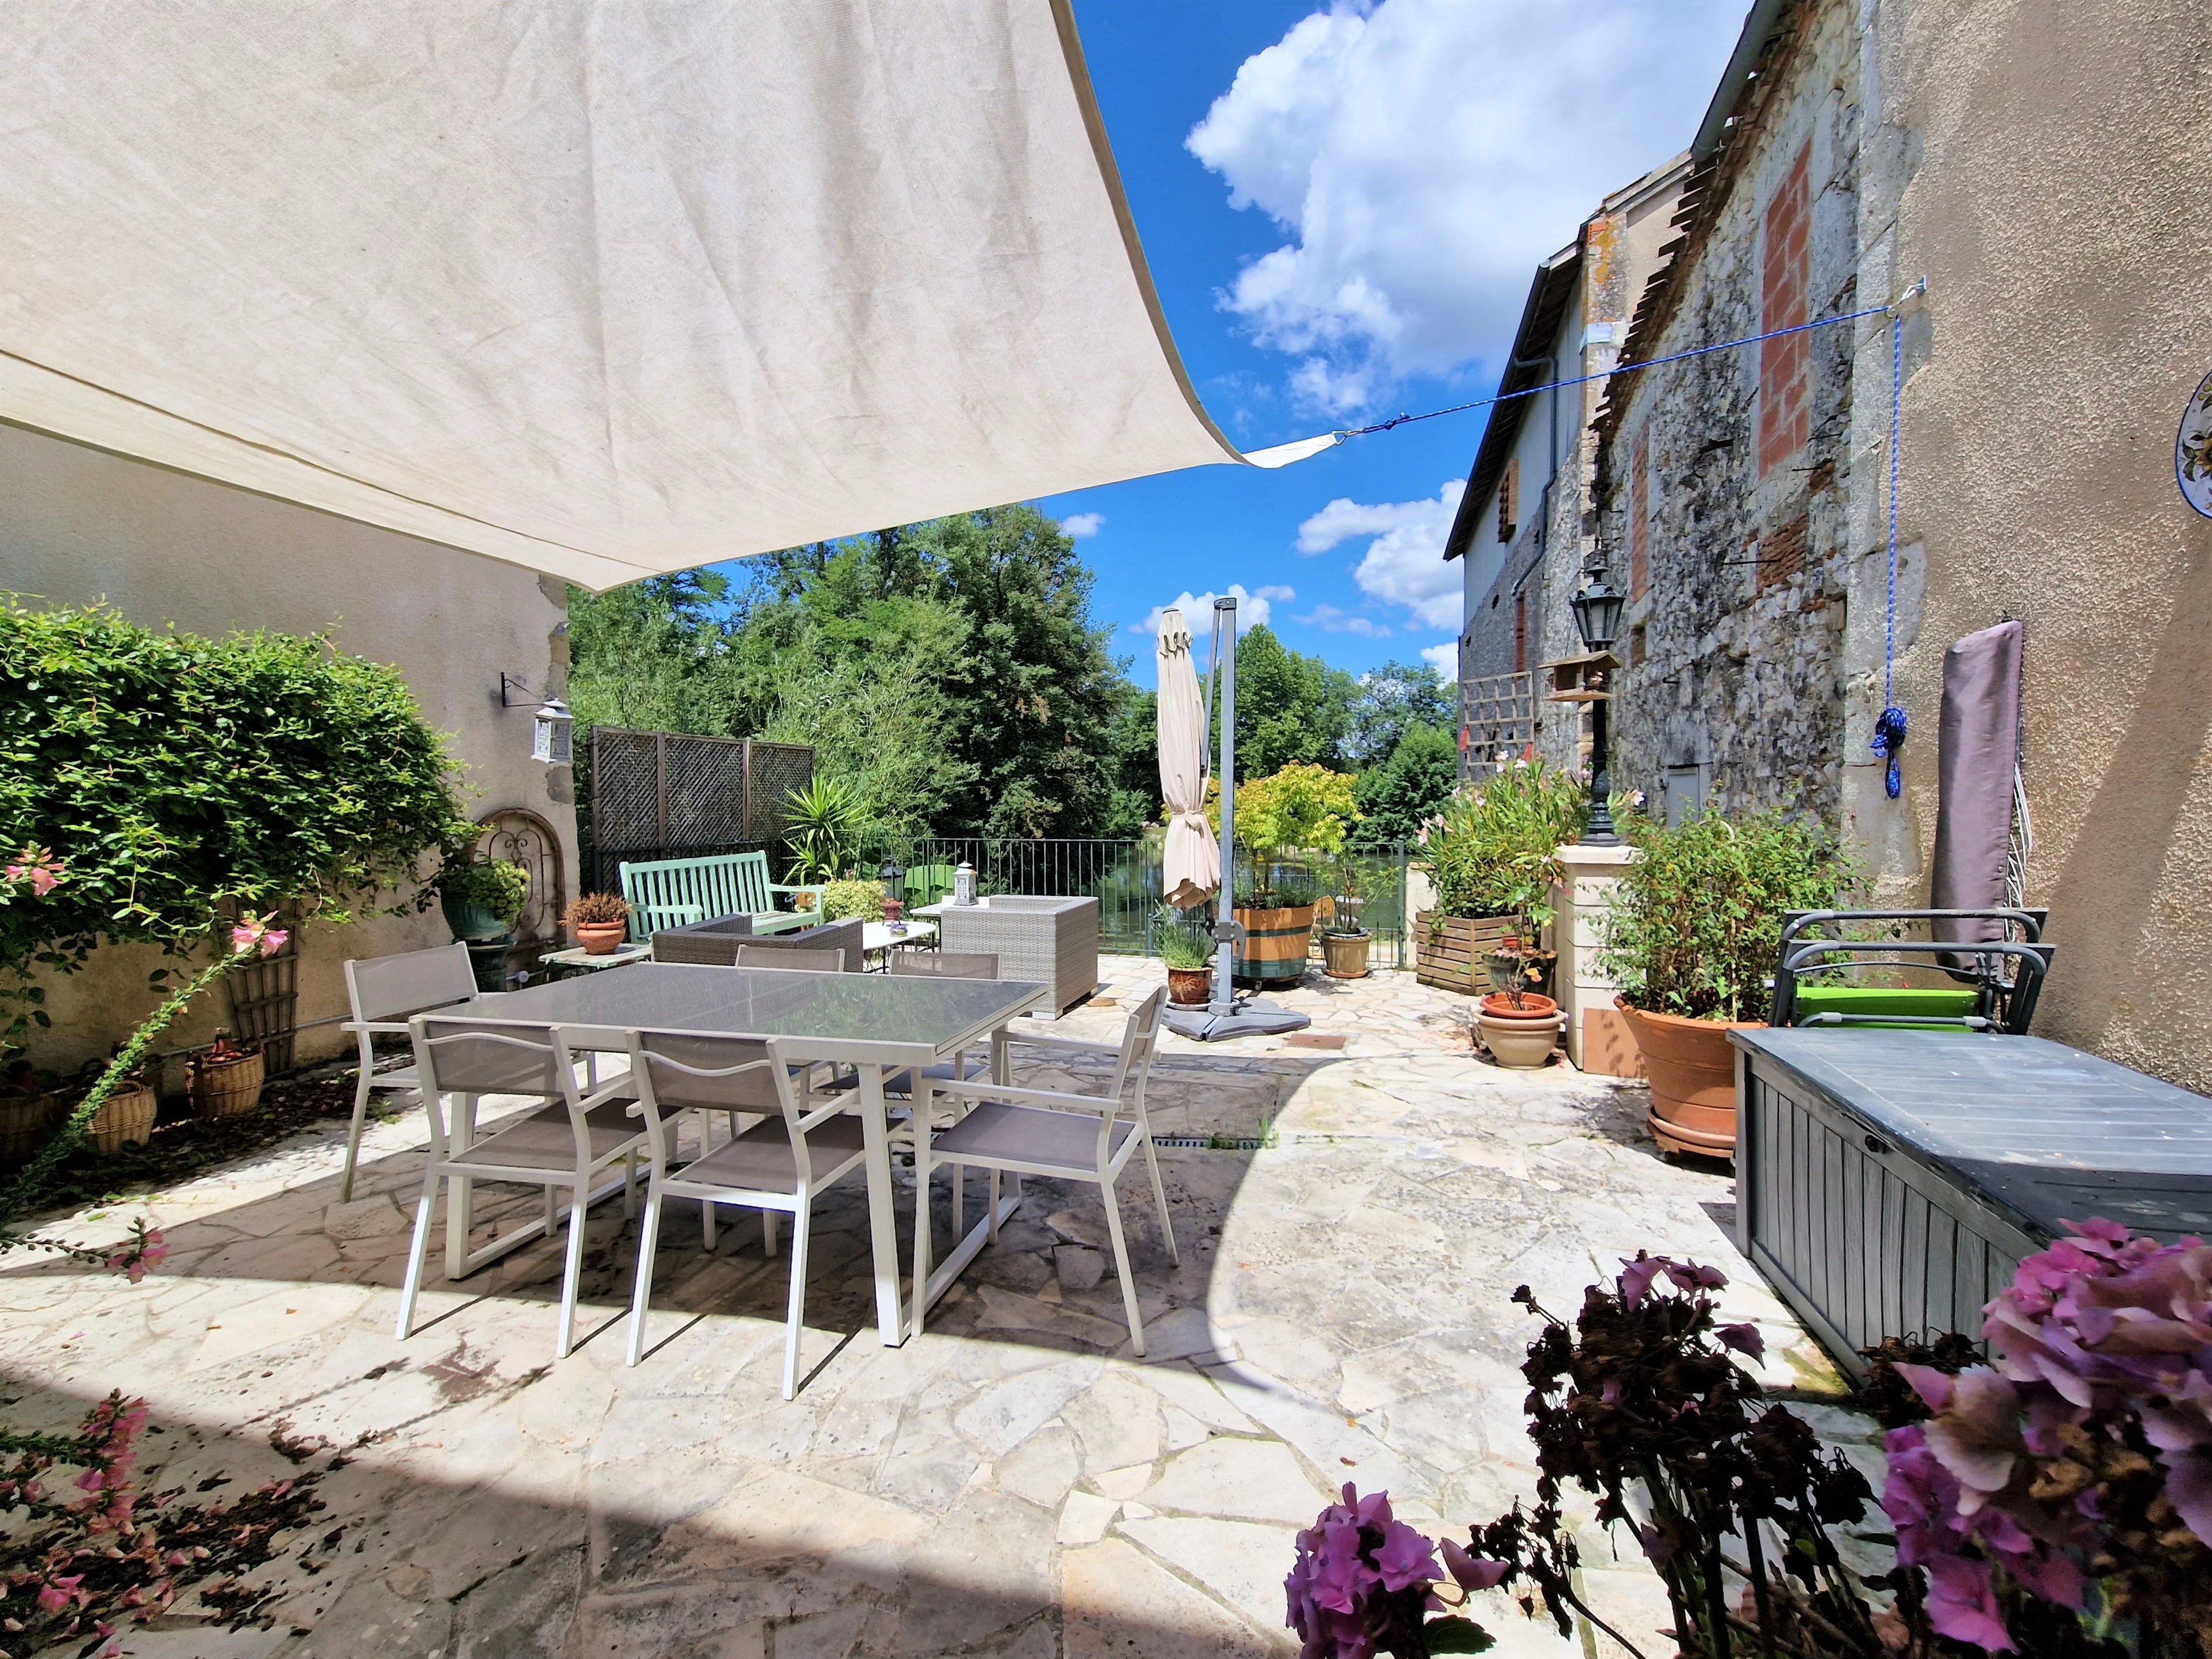 Riverside property - perfect family home or chambre d'hote!